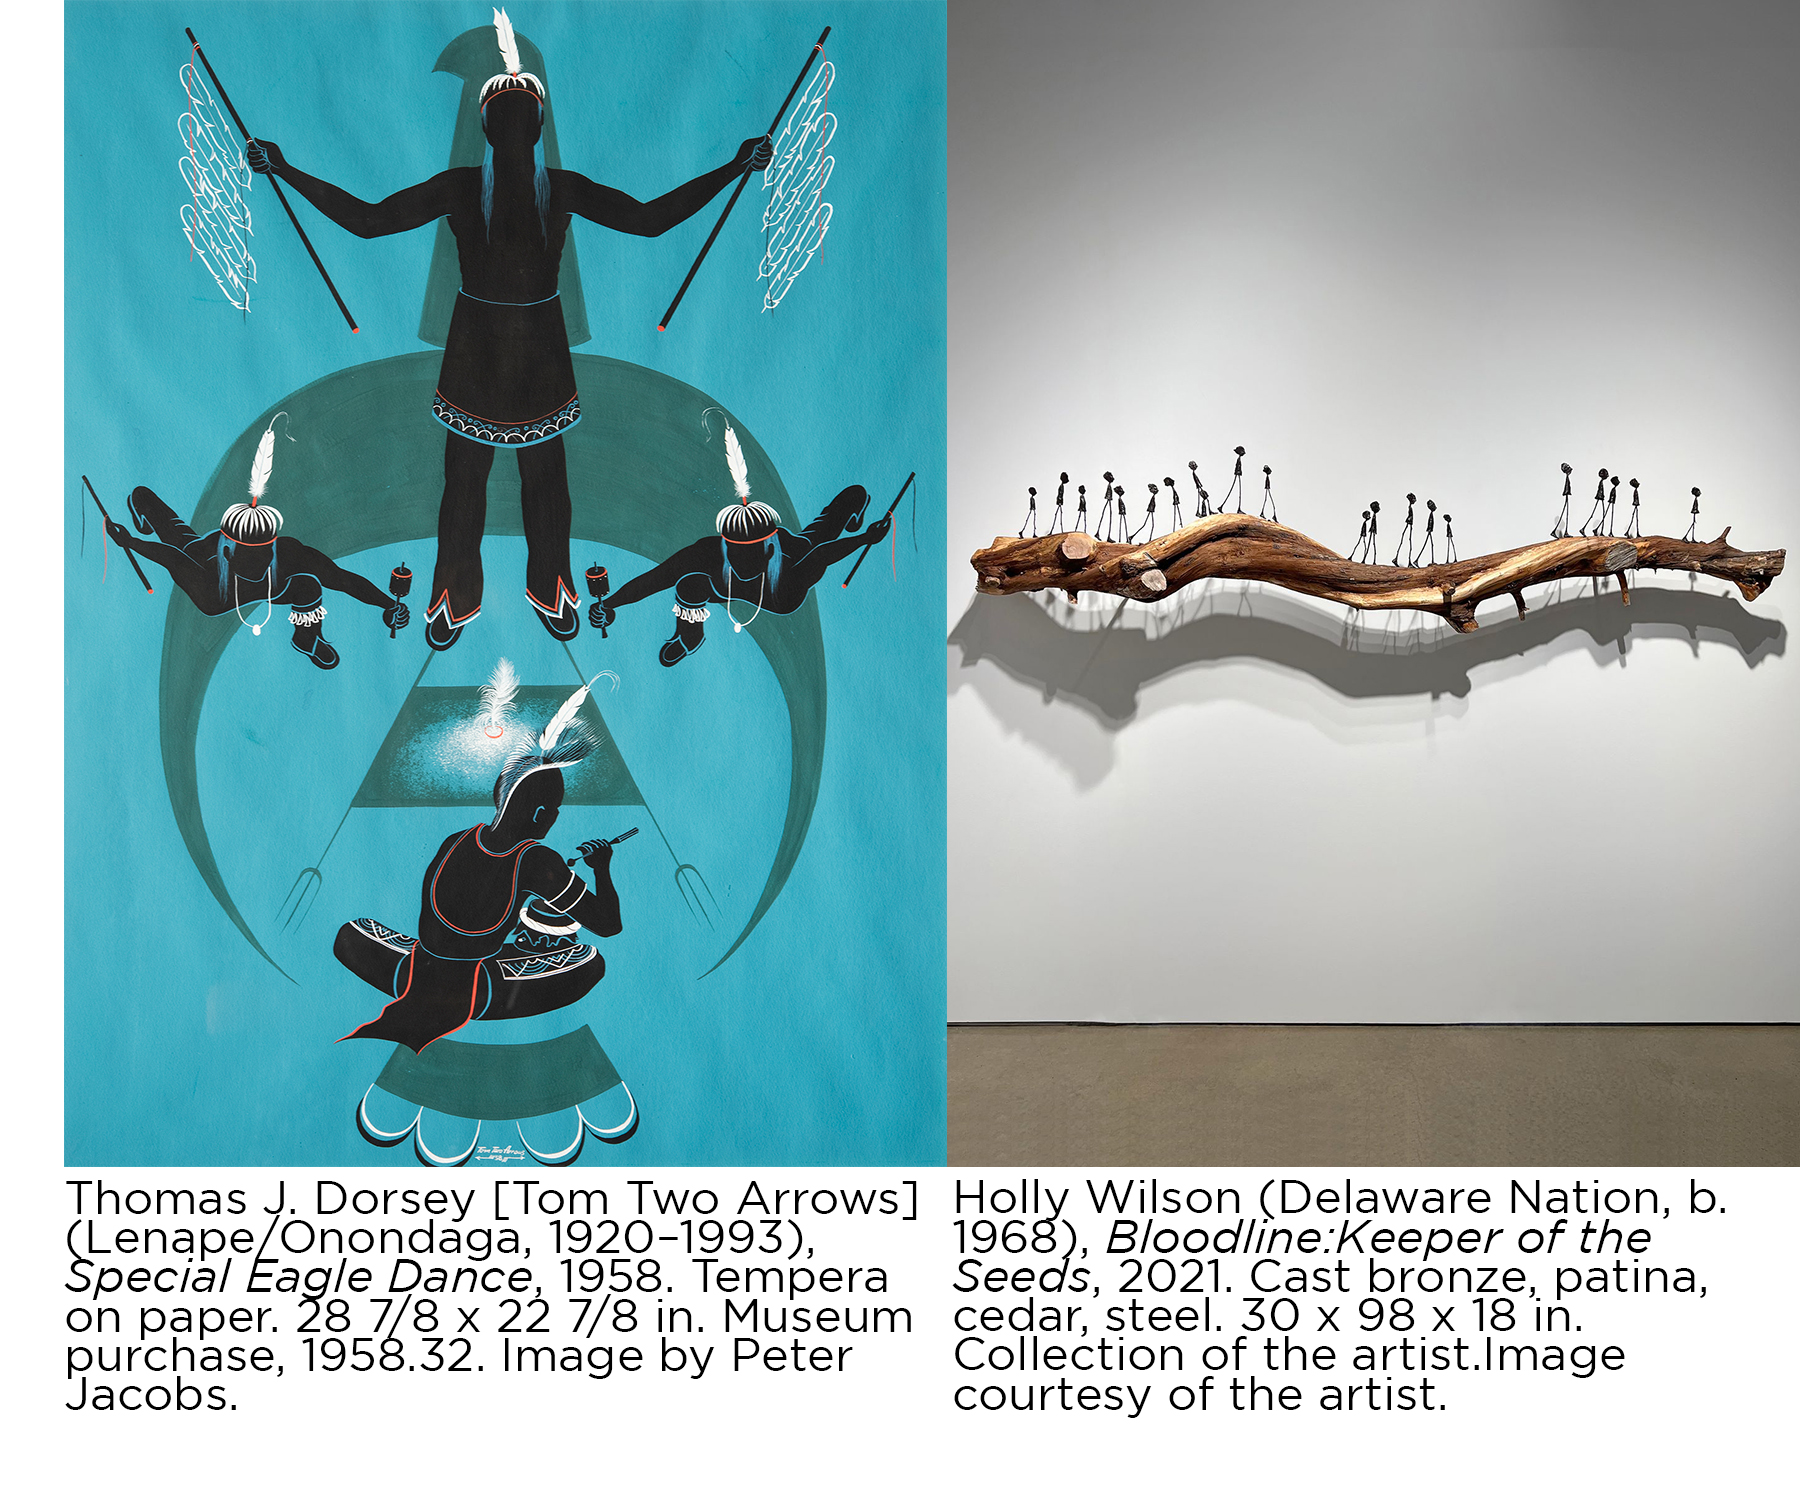 Collage of Thomas J. Dorsey [Tom Two Arrows] (Lenape/Onondaga,  1920–1993), Special Eagle Dance, 1958. Tempera on paper.  28 7/8 x 22 7/8 in. Museum purchase, 1958.32. Image by  Peter Jacobs. (left) and Holly Wilson (Delaware Nation, b. 1968), Bloodline: Keeper of  the Seeds, 2021. Cast bronze, patina, cedar, steel. 30 x 98 x 18  in. Collection of the artist. Image courtesy of the artist. (right)